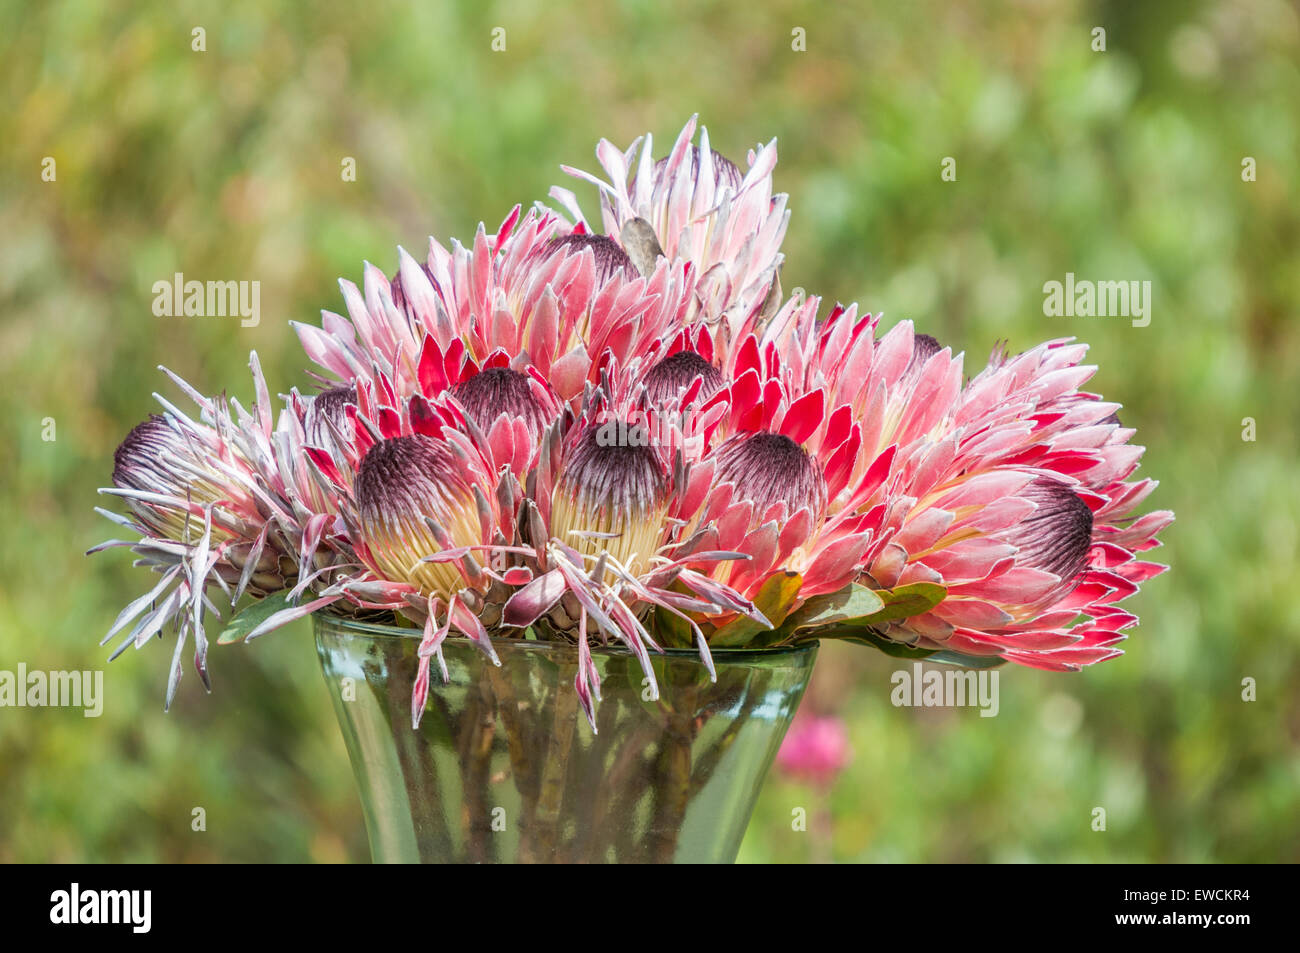 Vase with red, pink and purple protea flowers Stock Photo